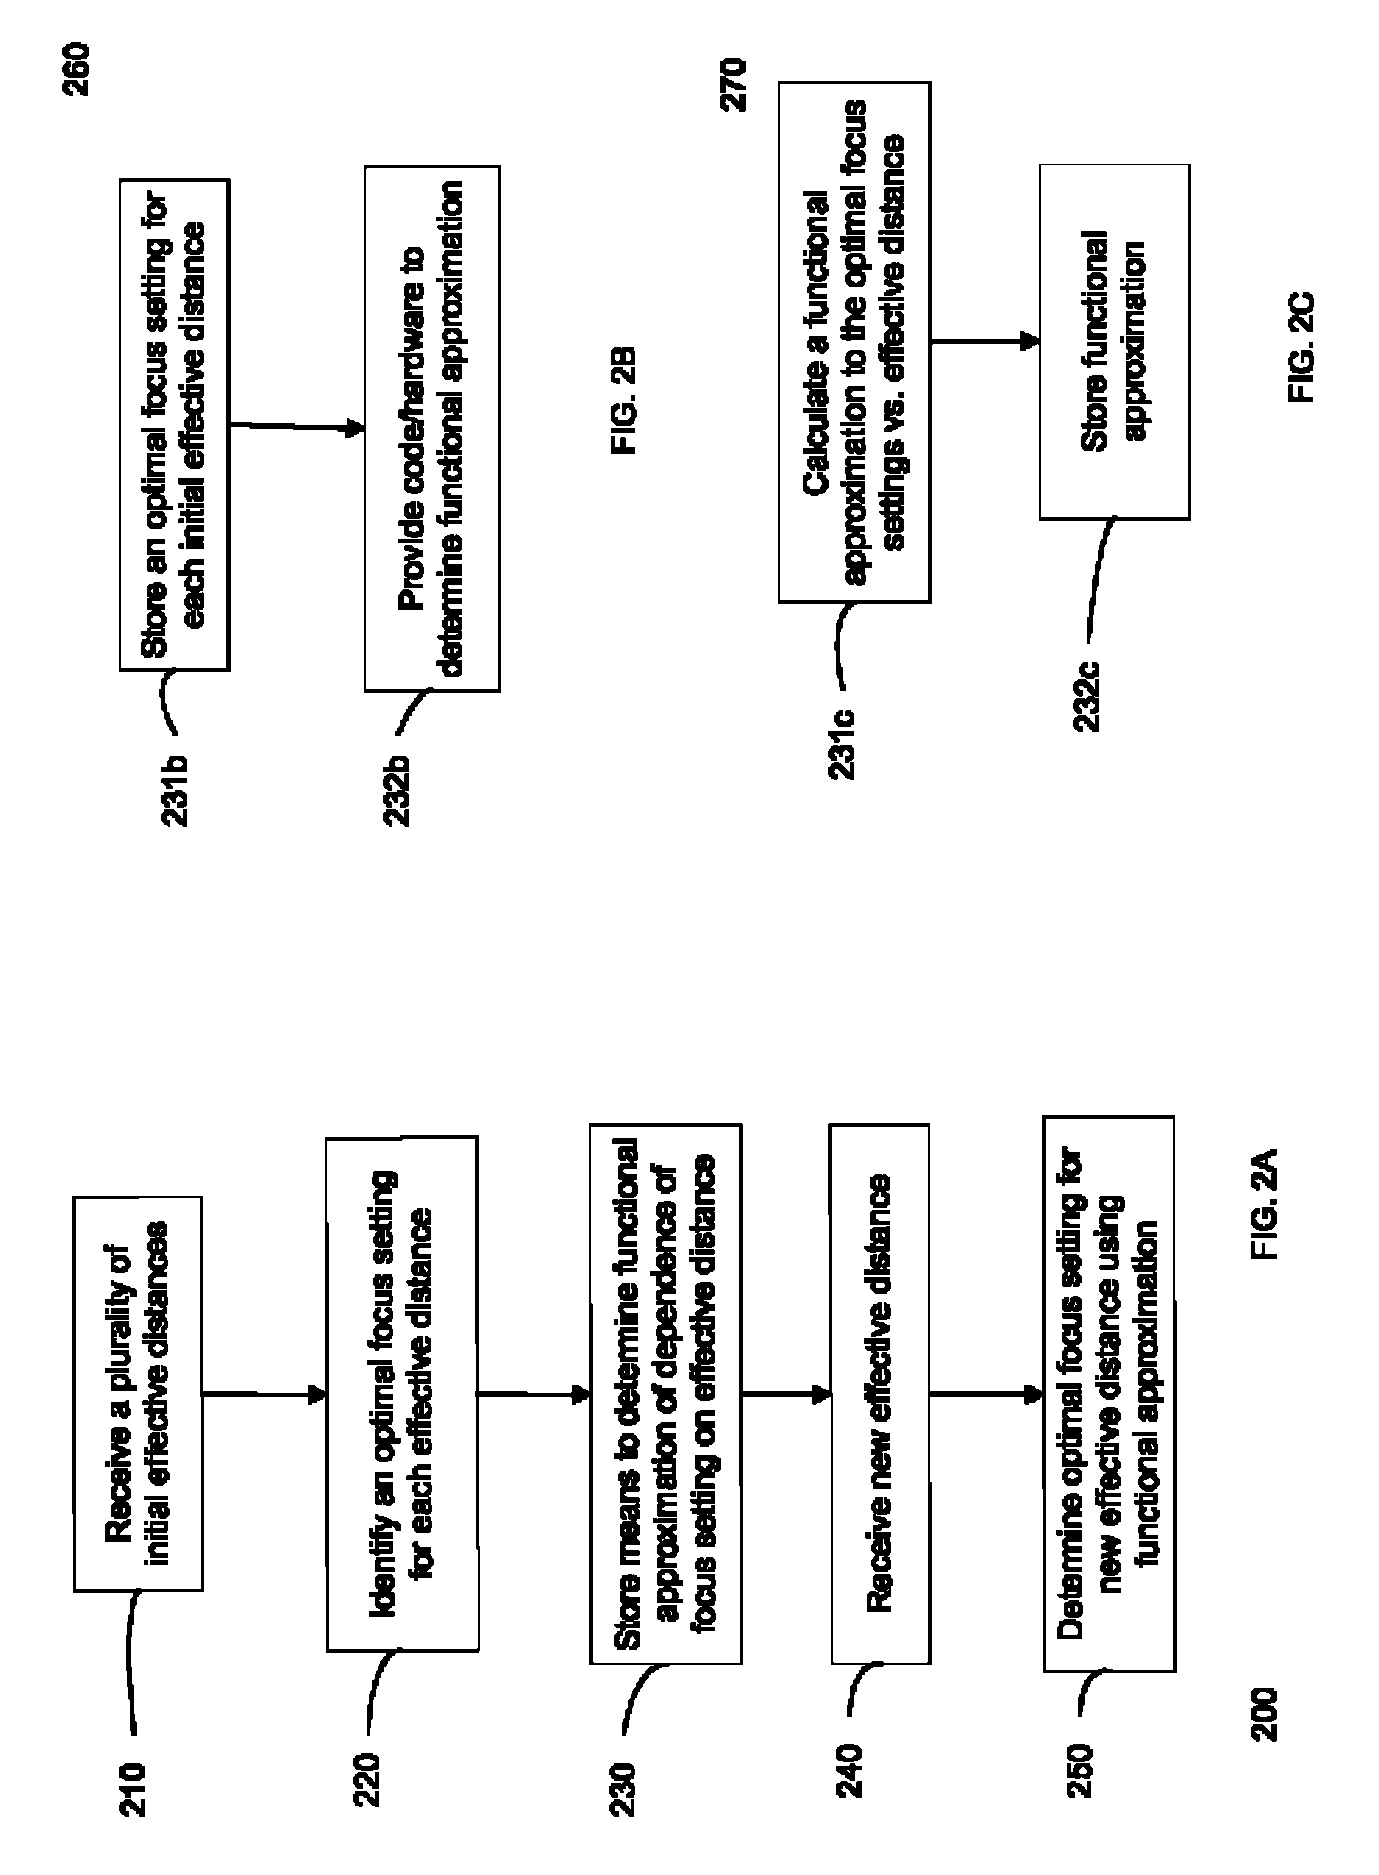 Calibration of imaging device for biological/chemical samples